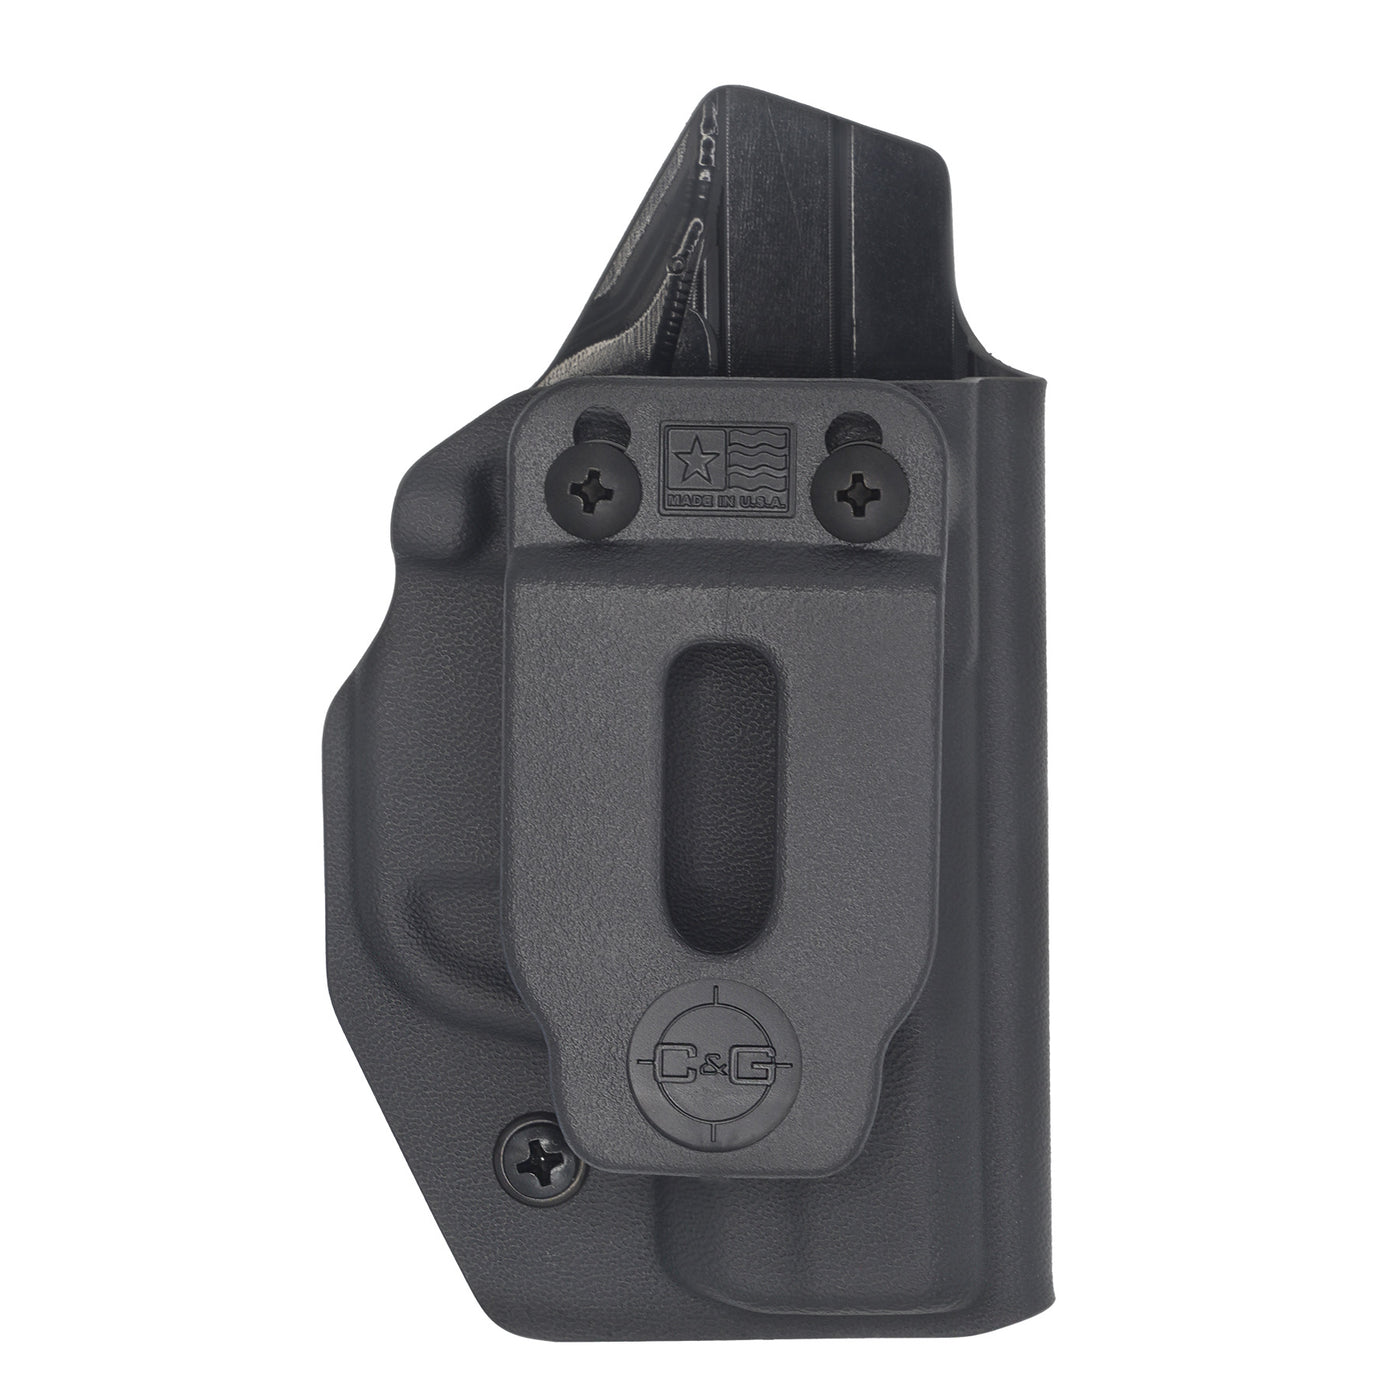 C&G Holsters quick ship Covert IWB kydex holster for LCPII in black front view without gun